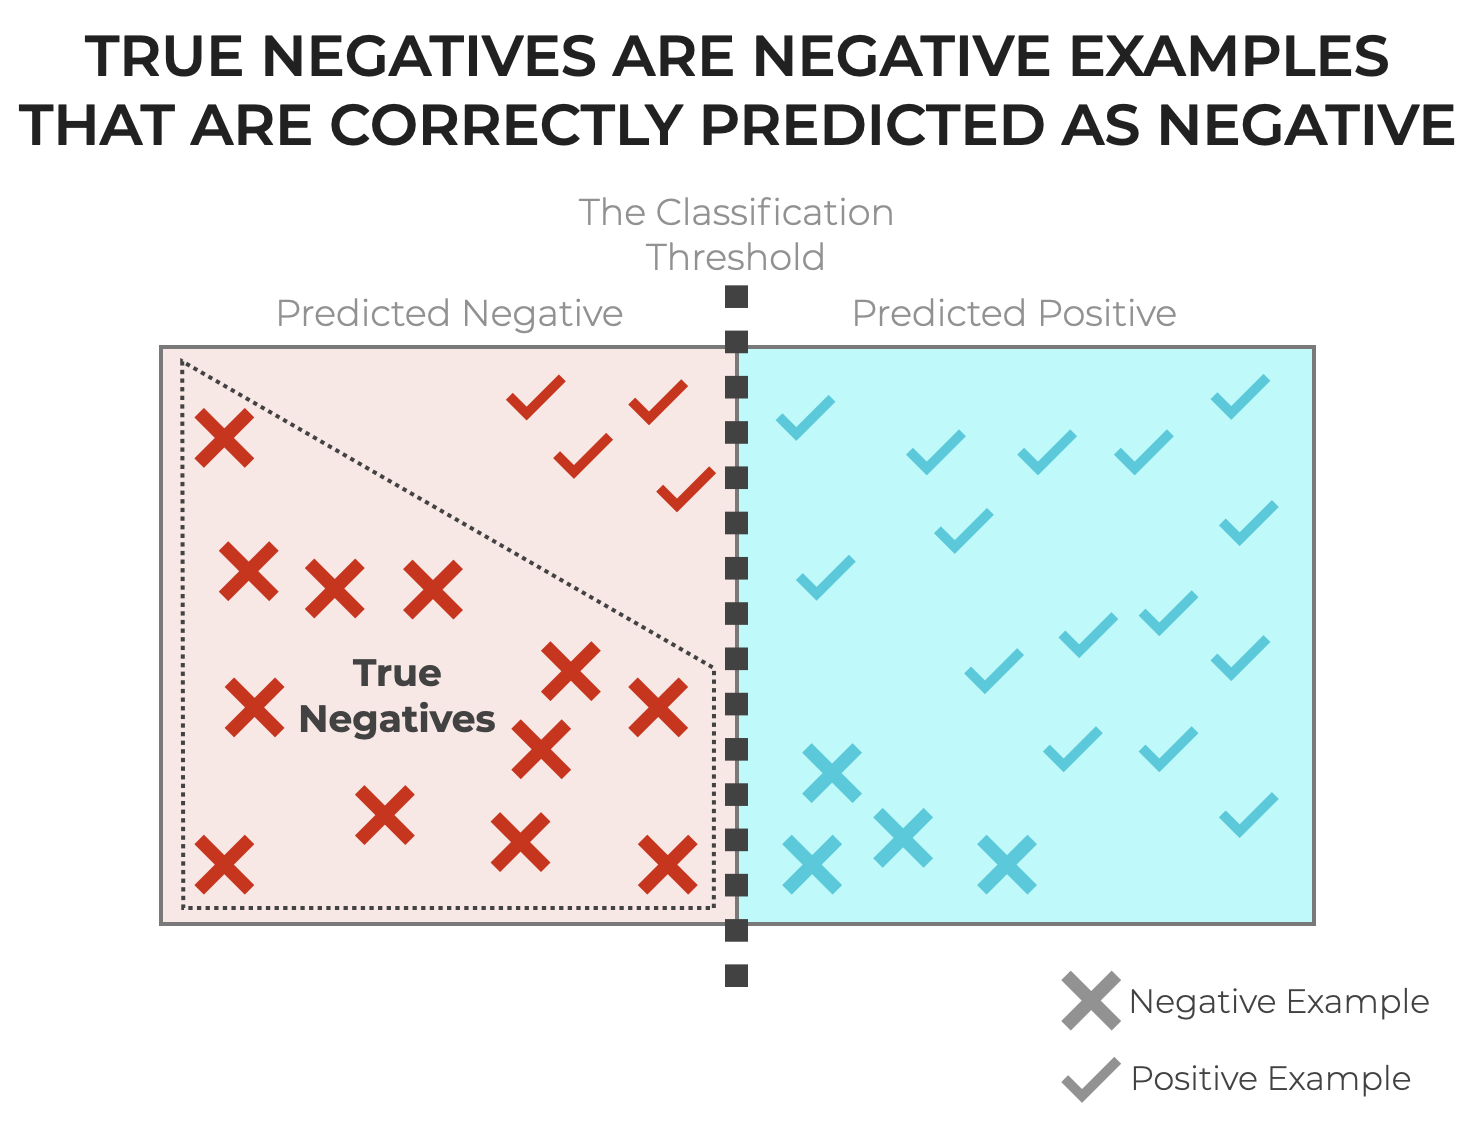 An image that shows True Negatives and their relationship to other classified examples, as well as classification threshold.